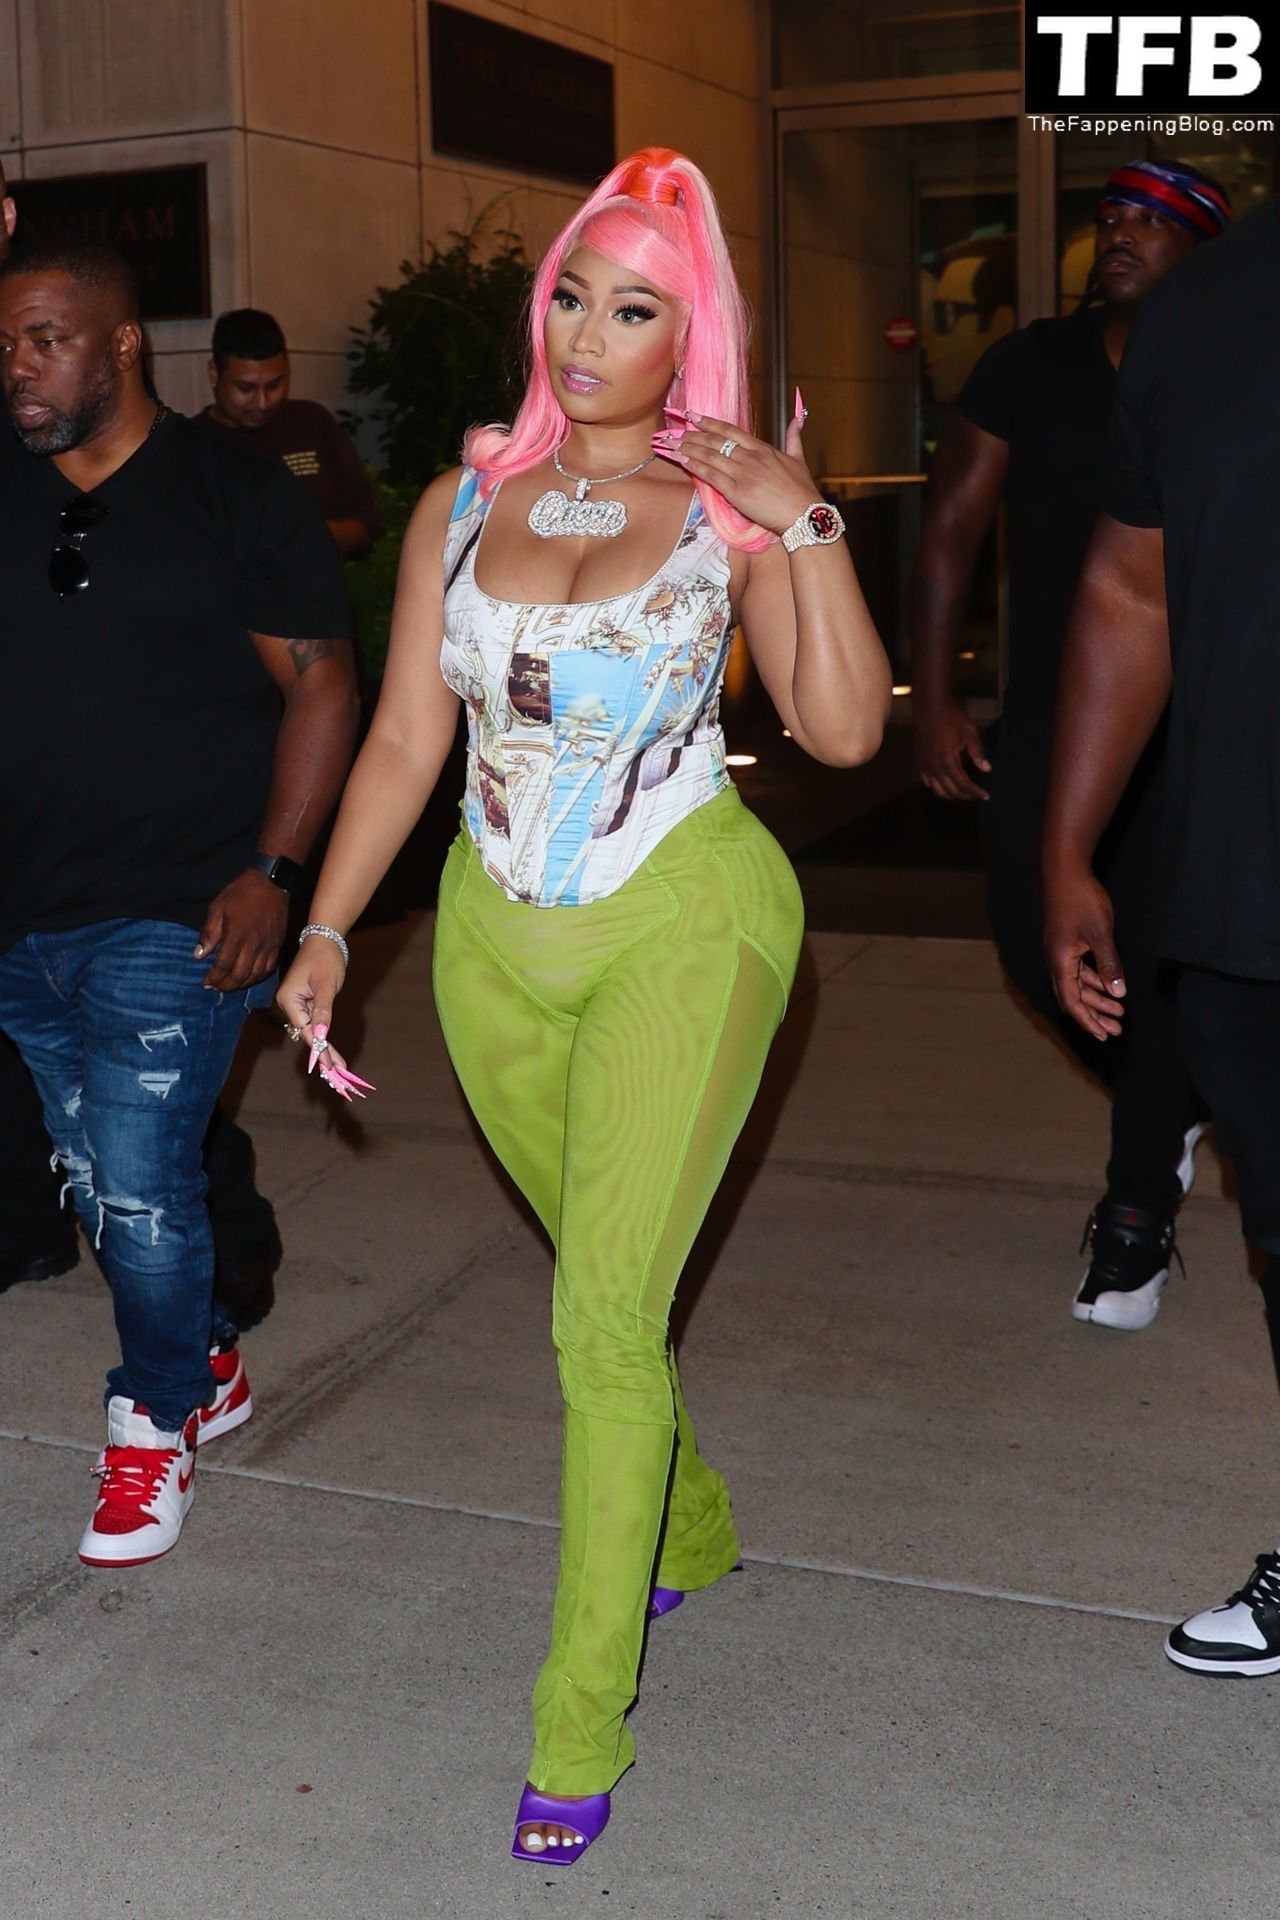 Nicki Minaj Sexy The Fappening Blog 27 - Nicki Minaj Checks Out of Her Hotel After Her Epic Night at the MTV VMA’s in NYC (38 Photos)